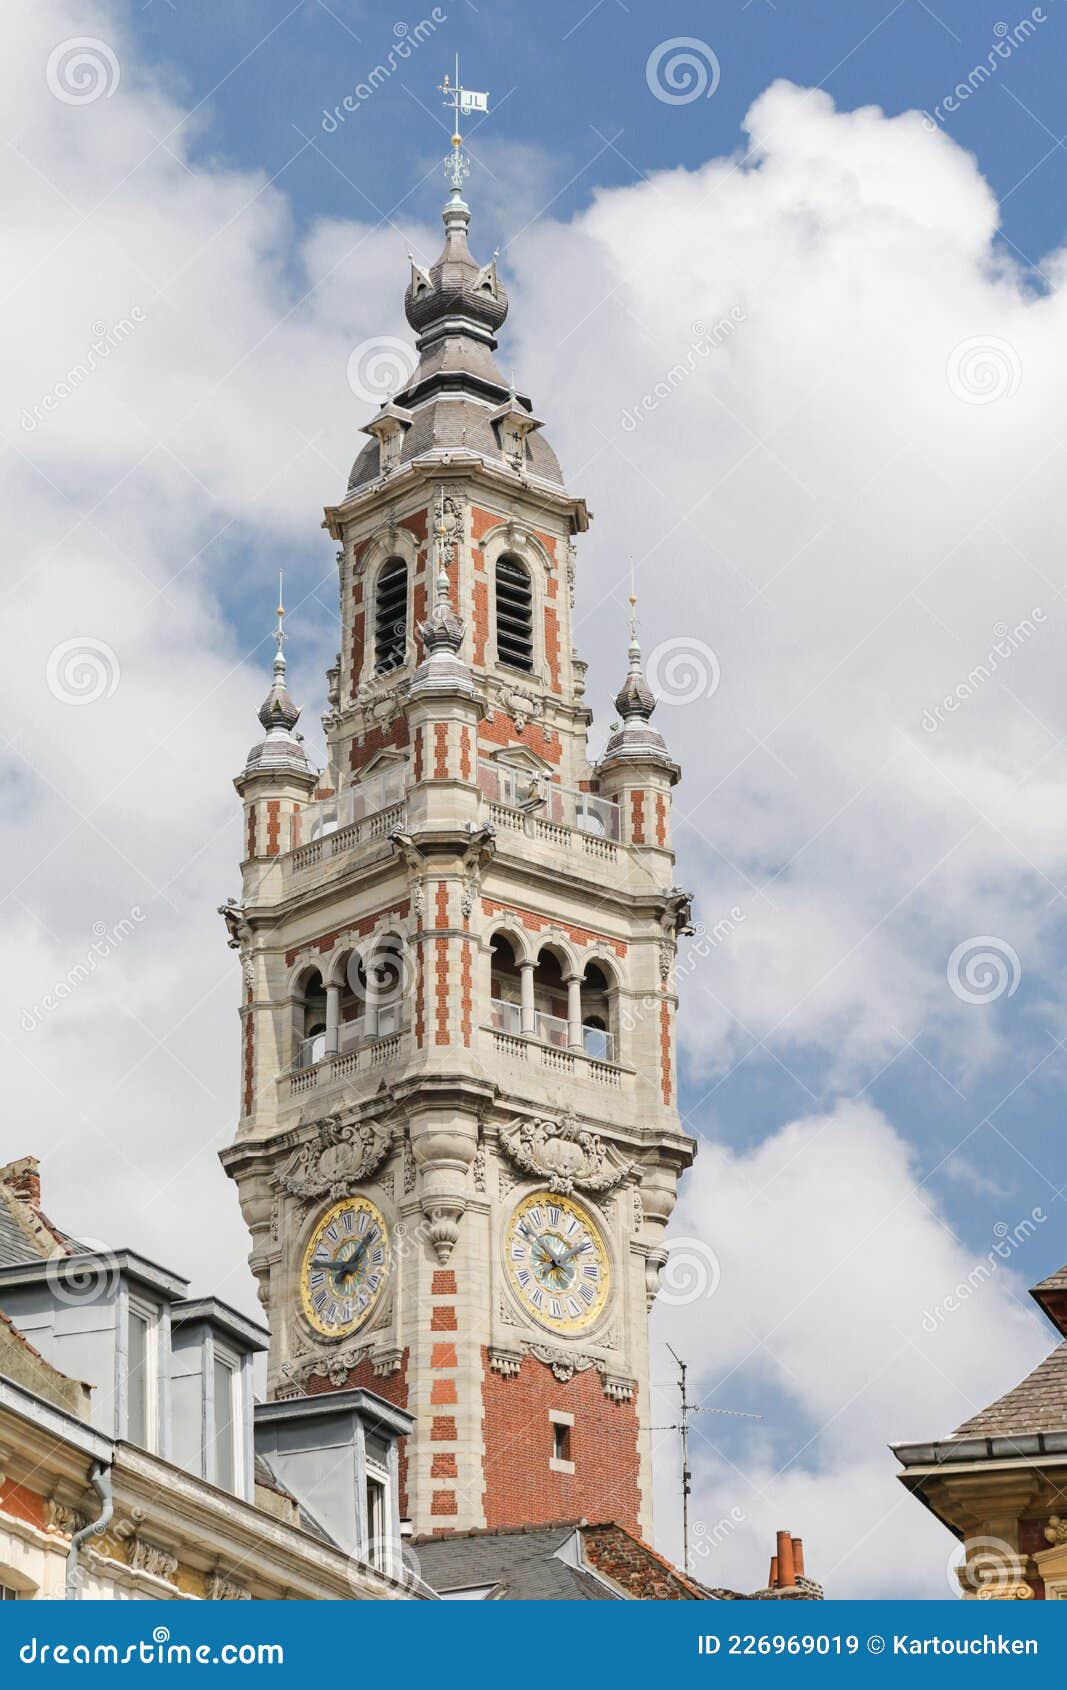 Grand Place Lille stock image. Image of building, medieval - 226969019